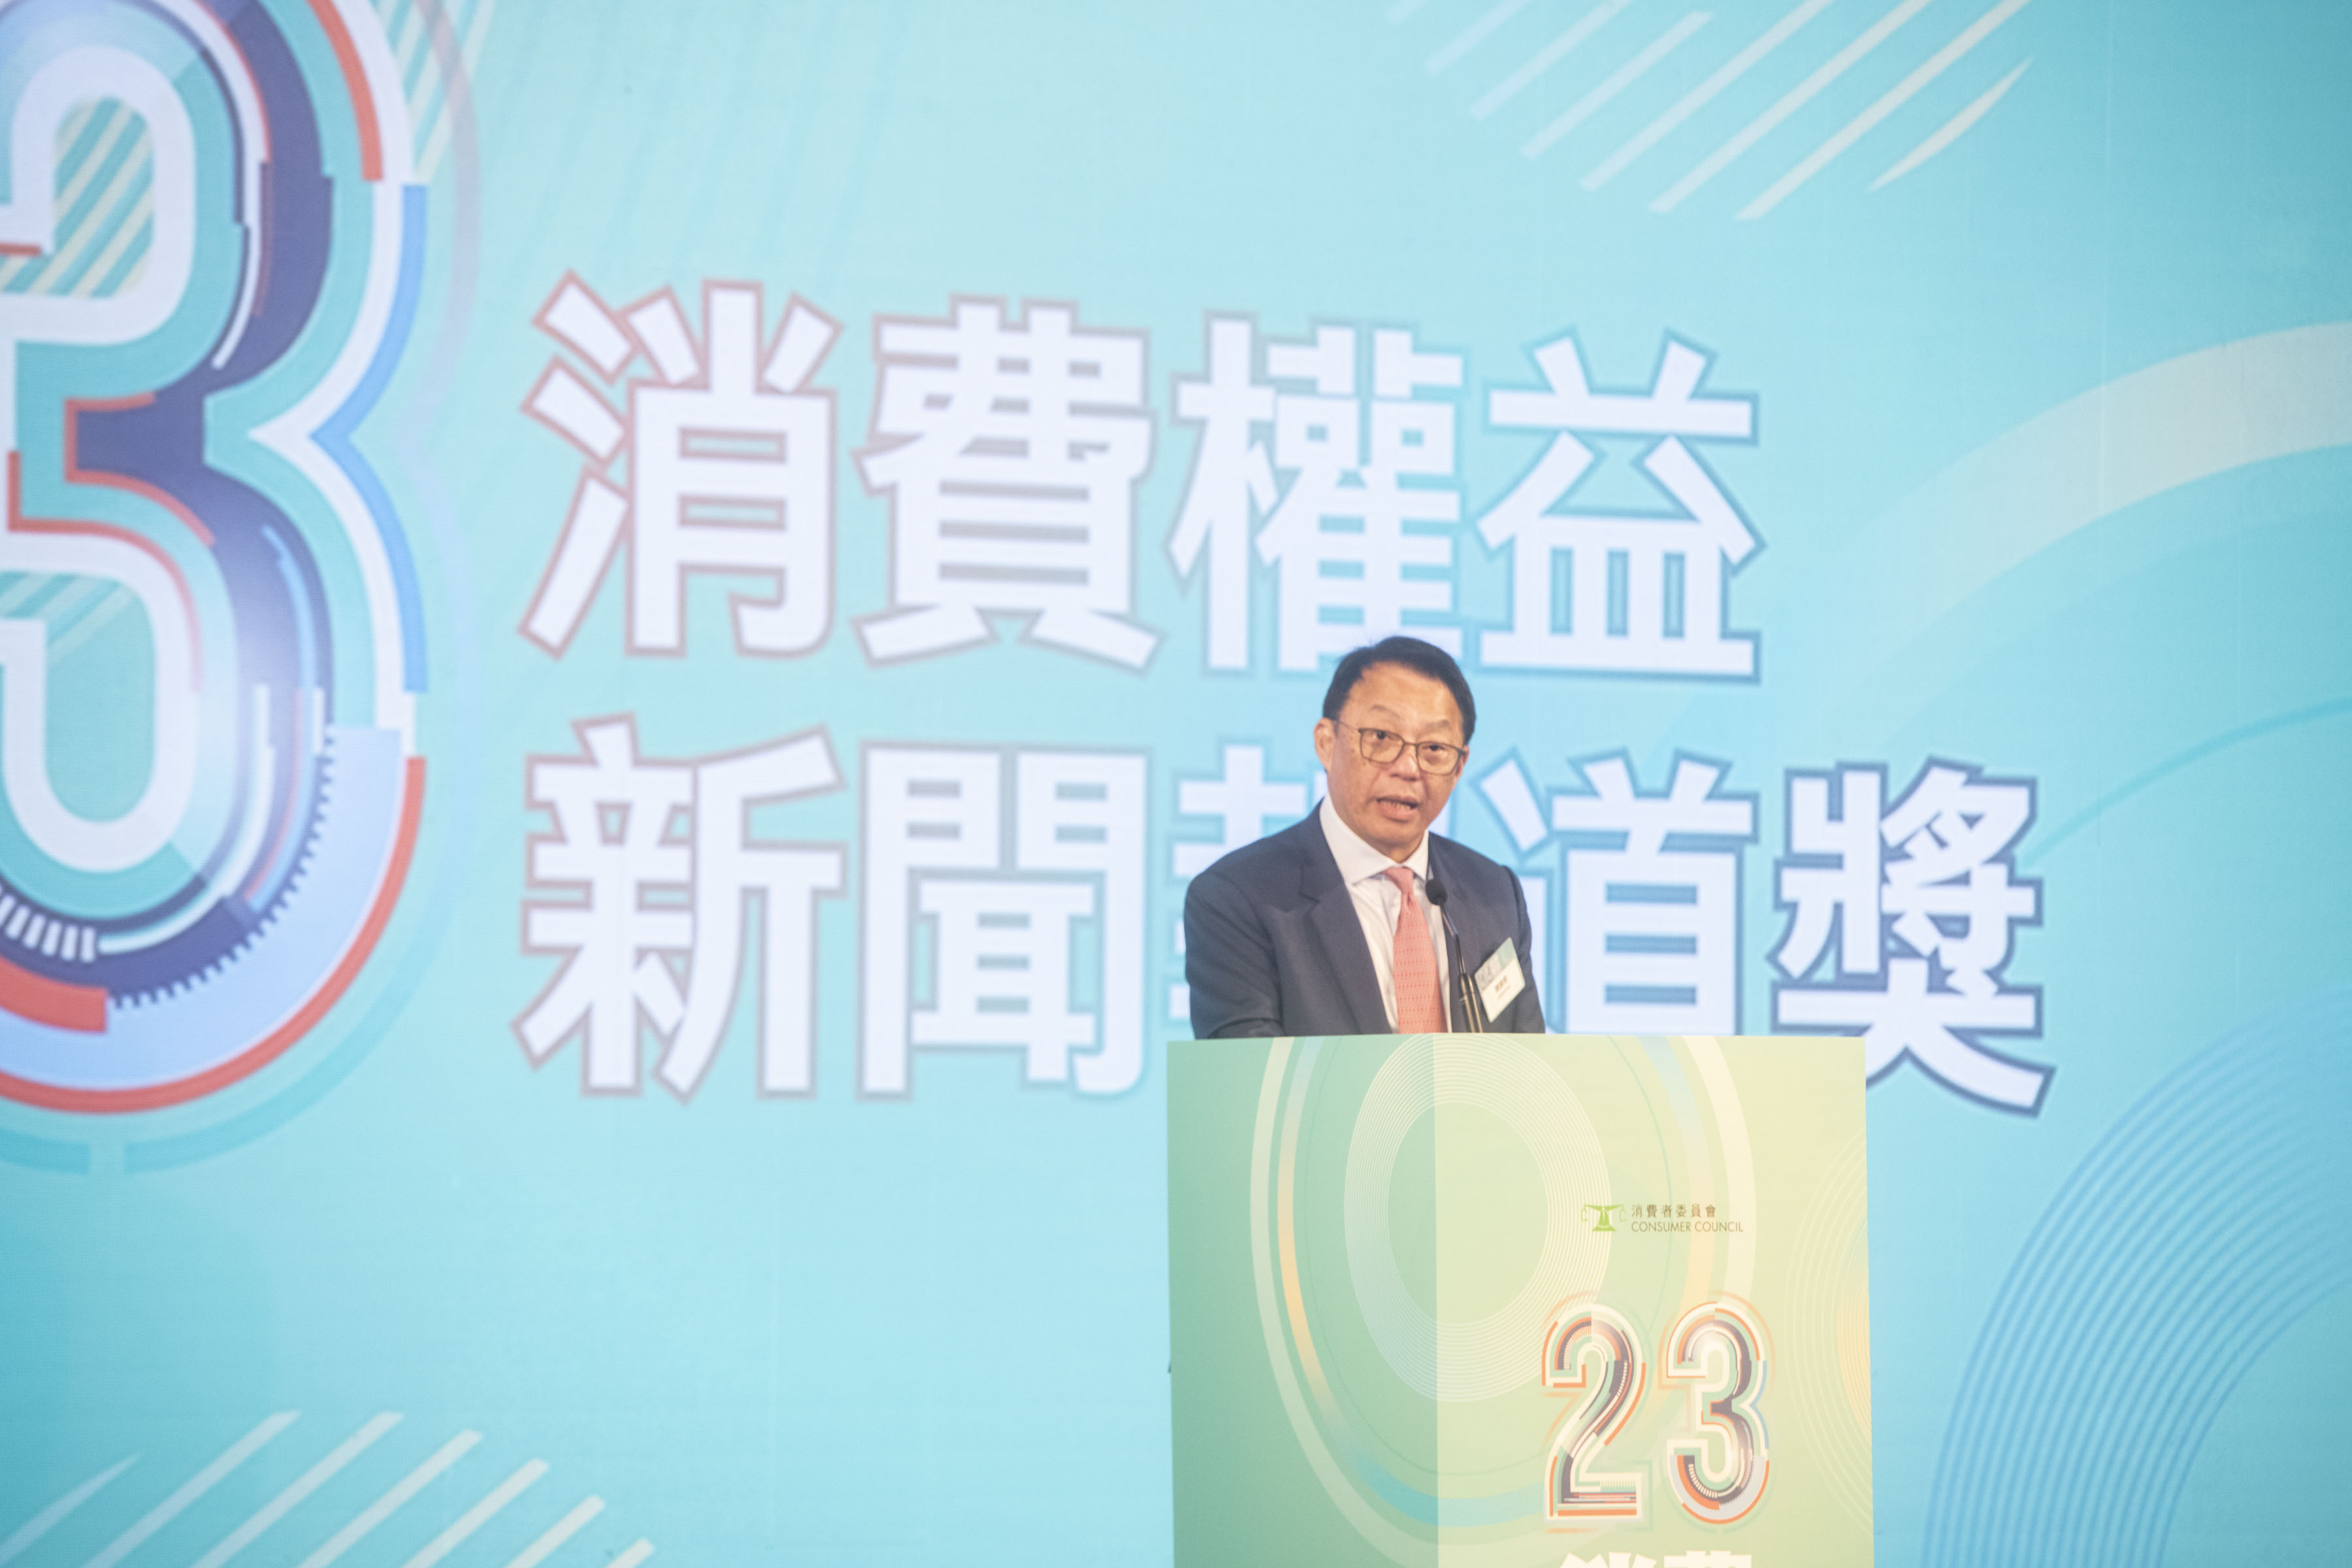 1.	Welcome speech by Mr Clement Chan Kam-wing, Chairman of the Consumer Council